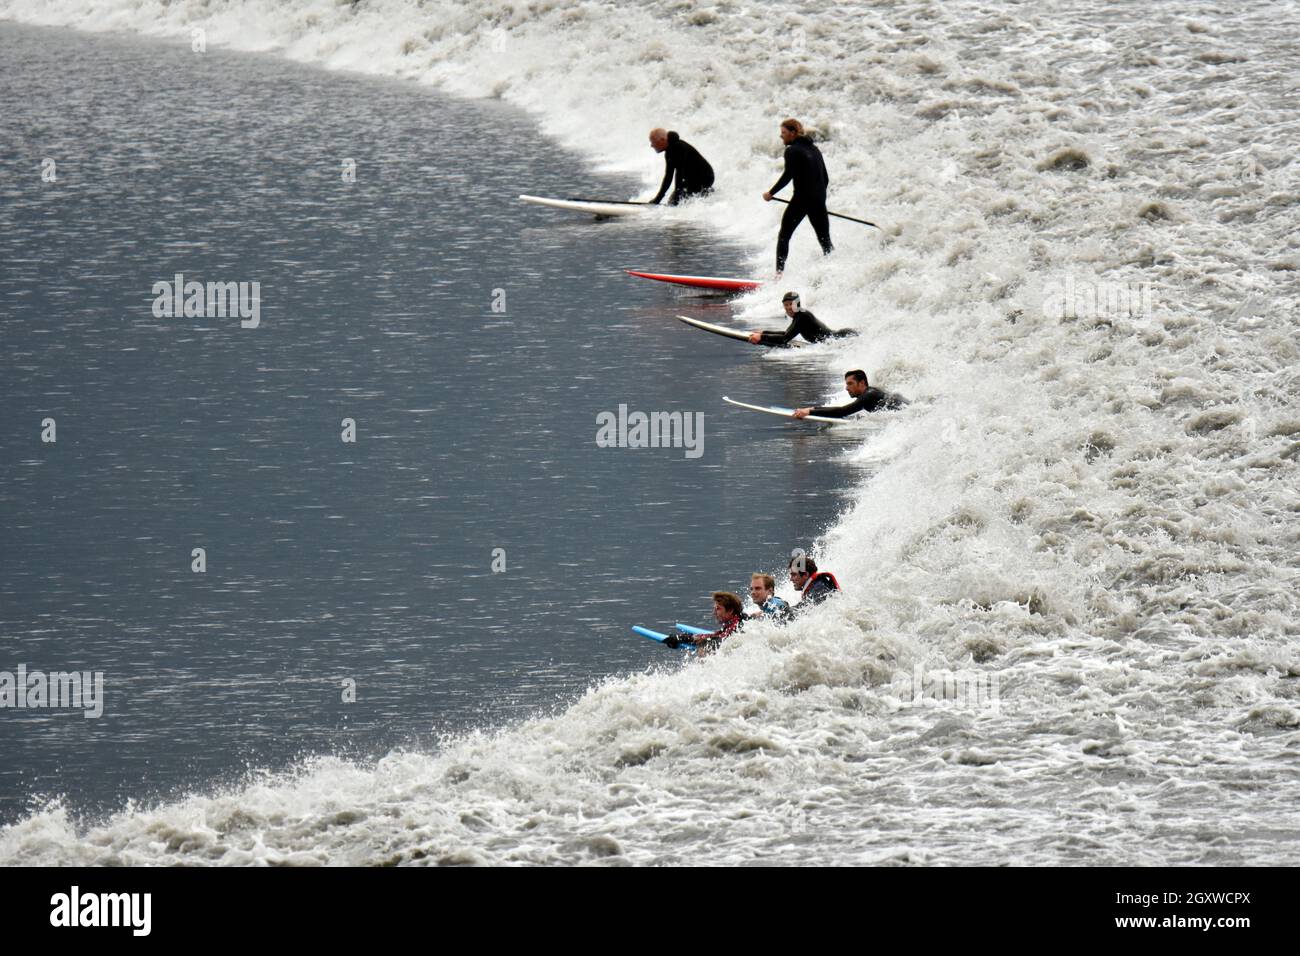 Cold water surfers ride a bore tide wave in the Turnagain Arm of the Cook Inlet, Anchorage, Alaska, USA Stock Photo